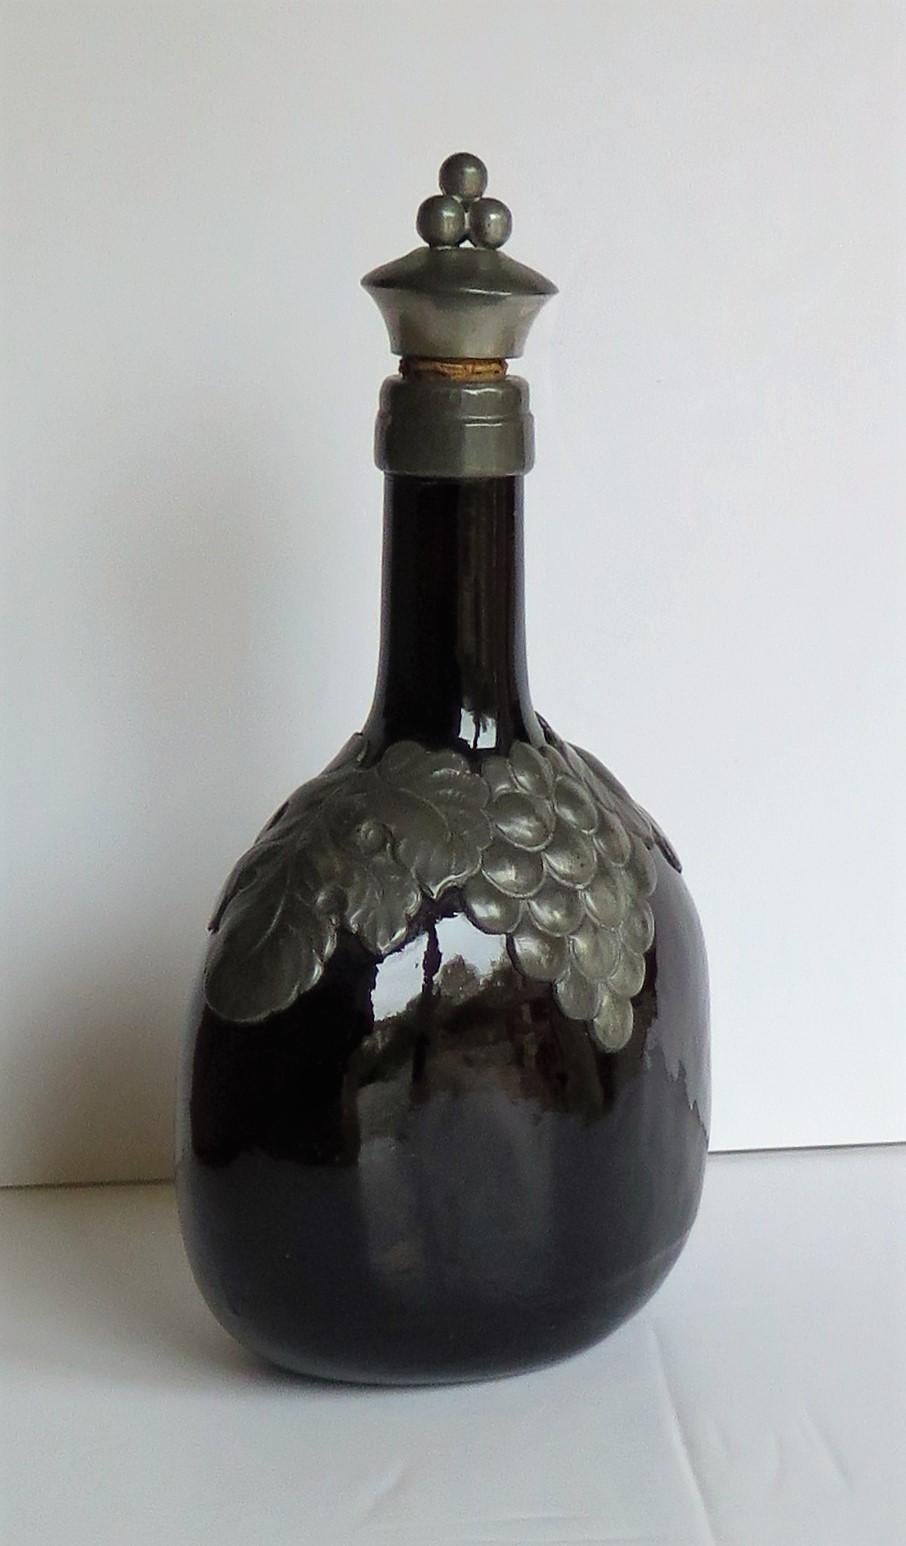 19th Century Amber Glass Bottle Decanter with Pewter Grape and Leaf Collar, Danish